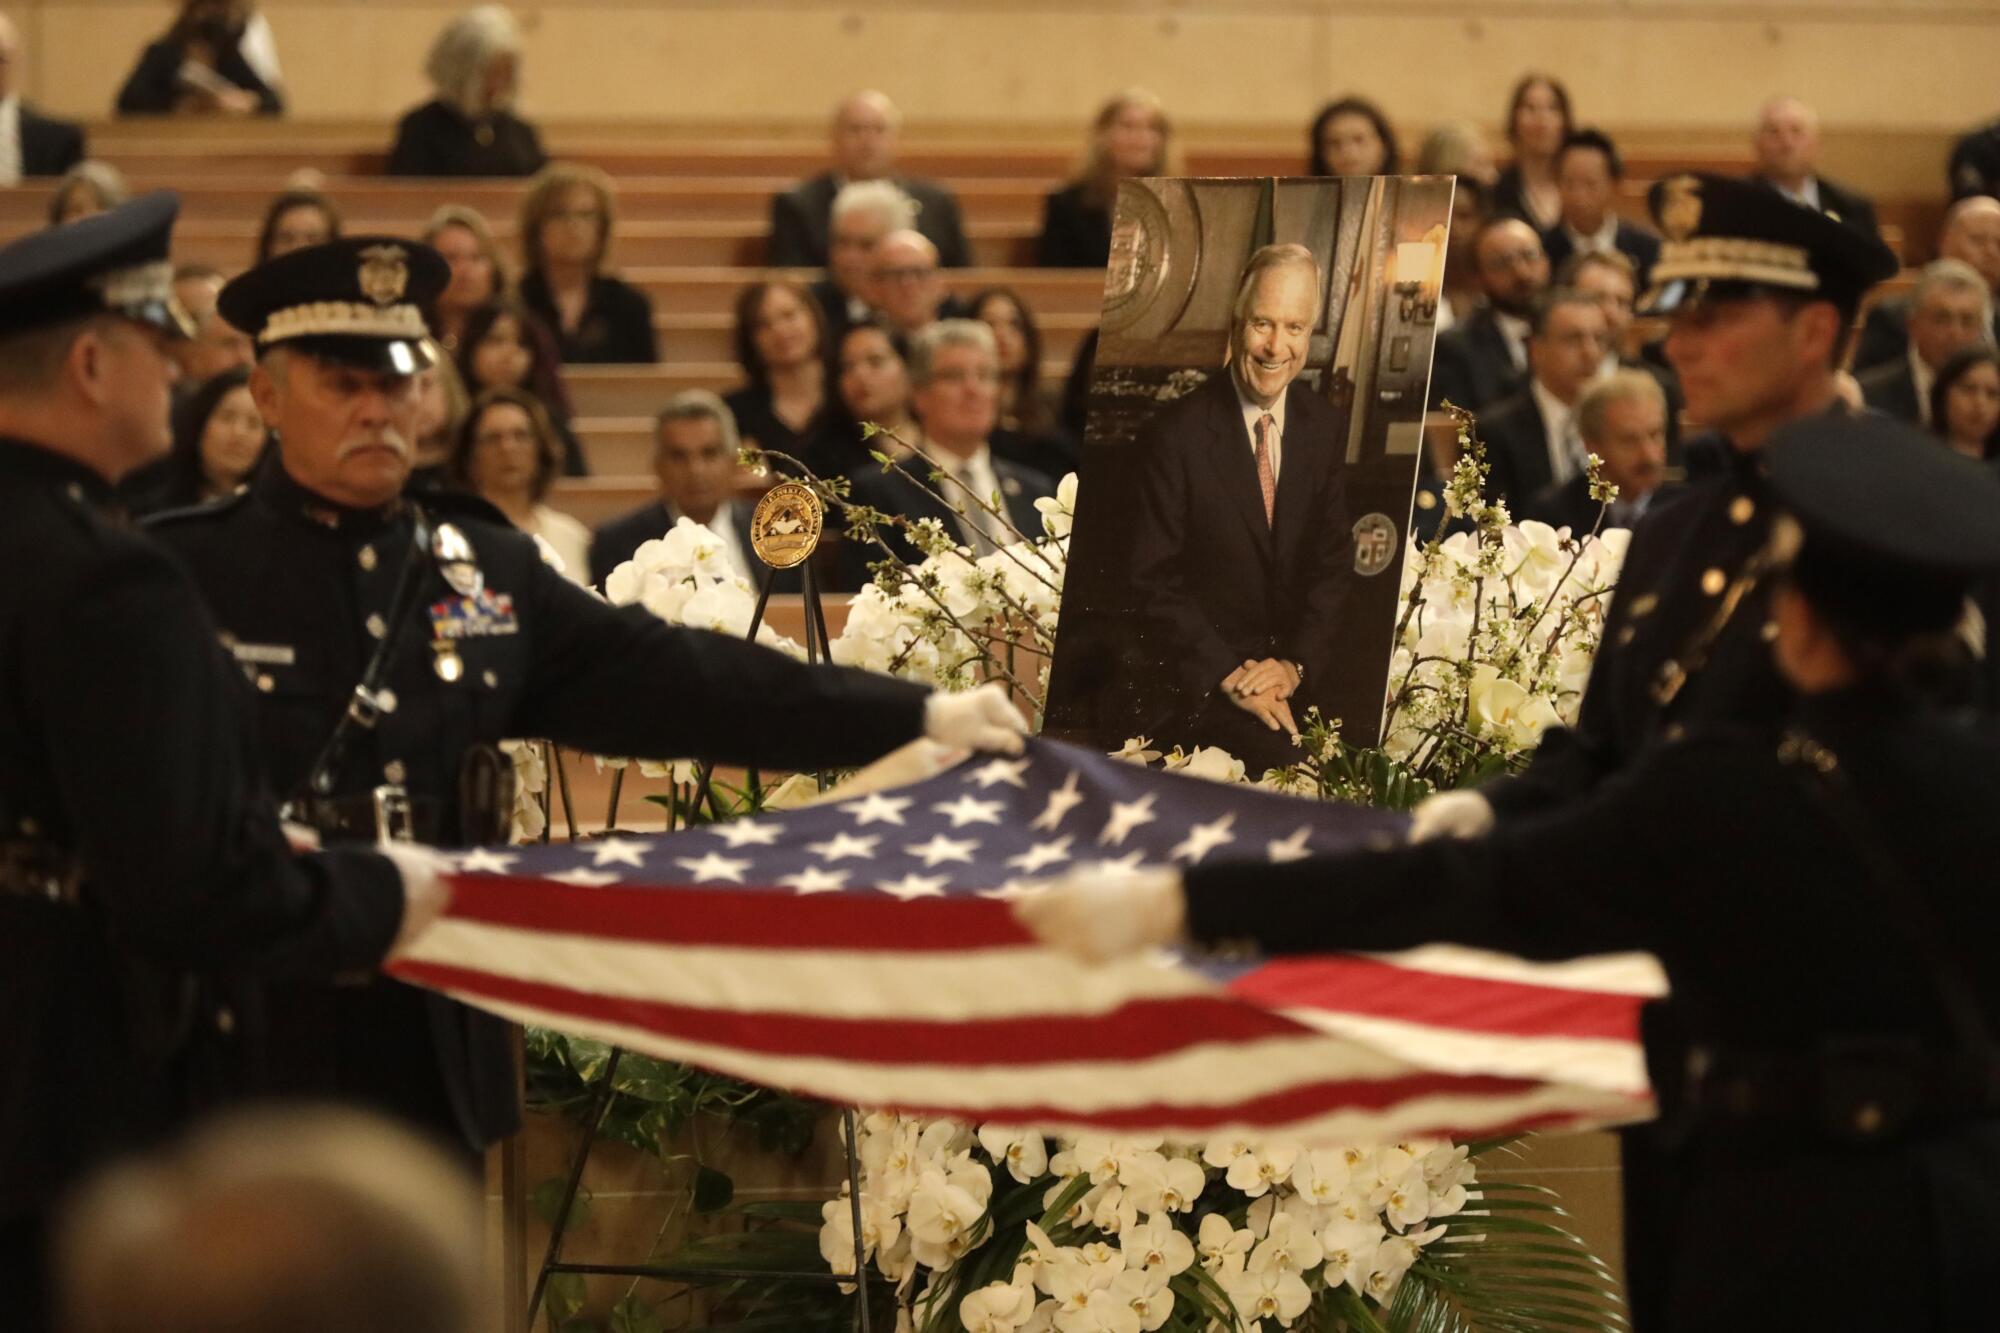 LAPD Color Guard present the flag, framed by a photo of former Los Angeles Mayor Richard Riordan